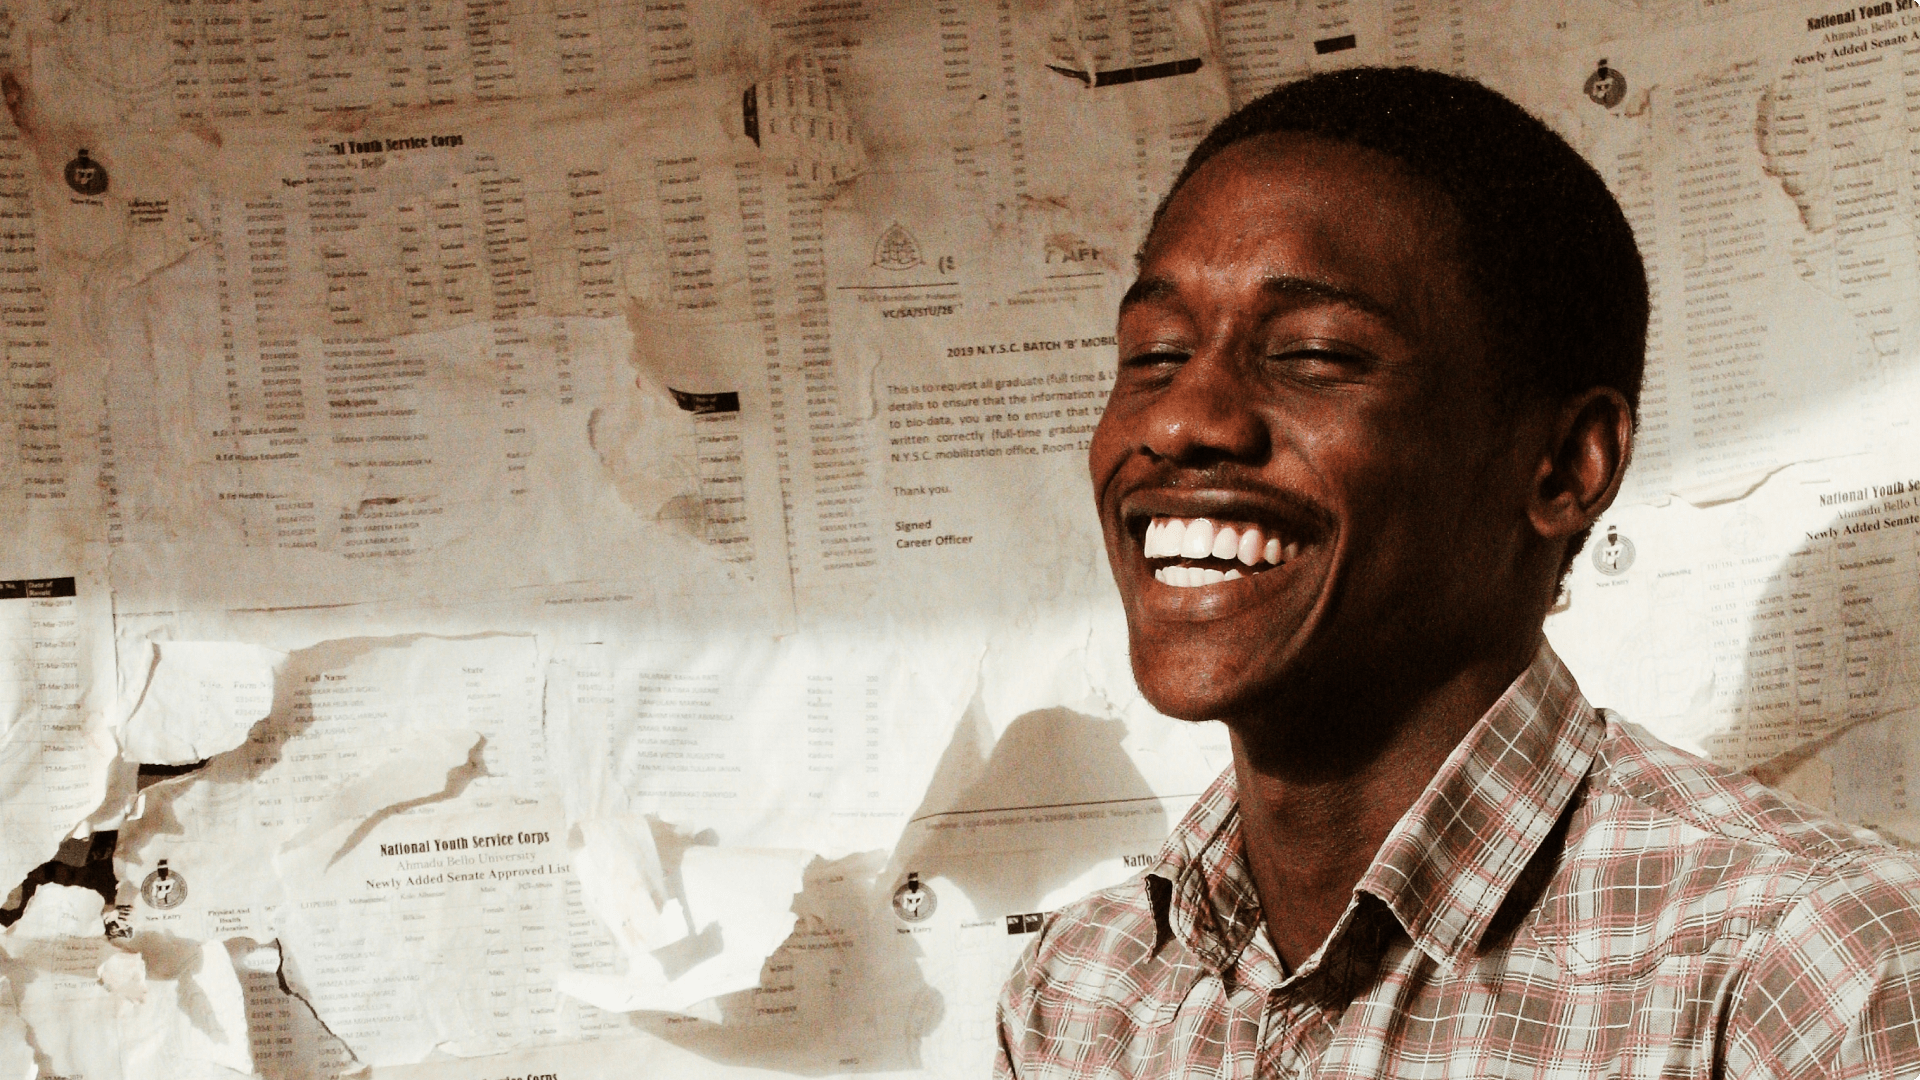 Photograph of a man smiling with joy, with papers on the wall